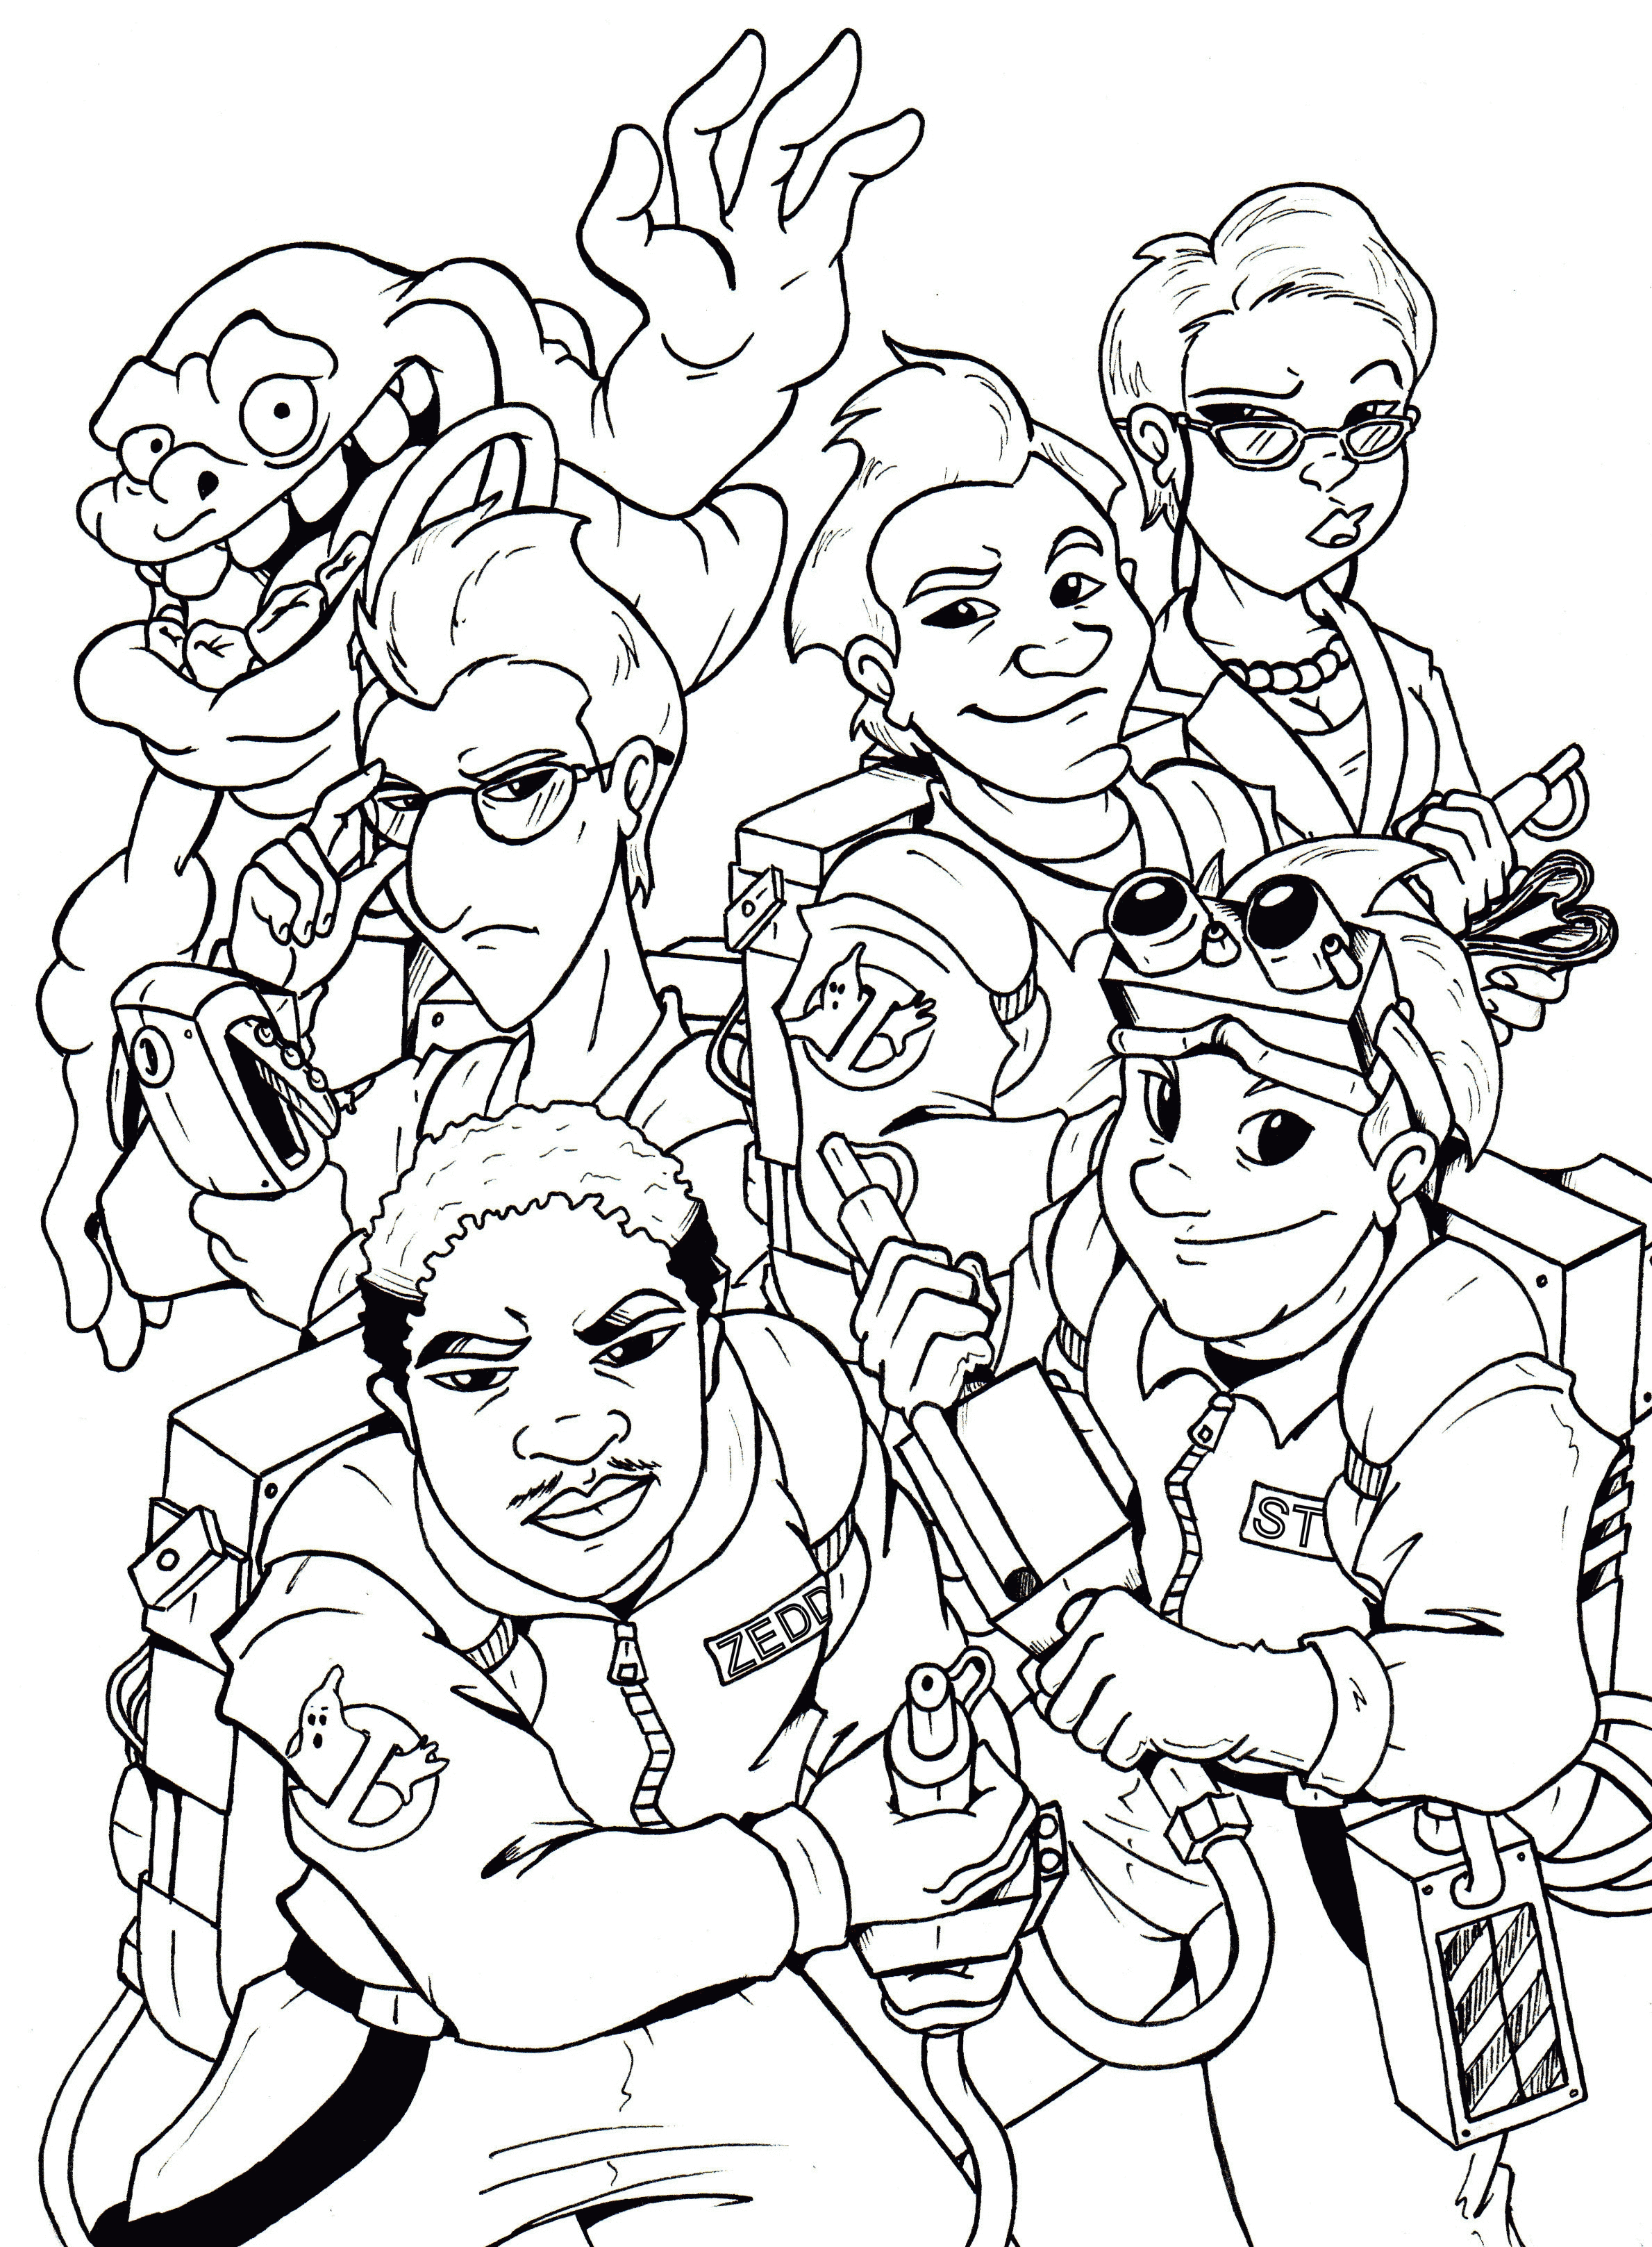 Download Ghostbusters Coloring Pages Ghostbusters 3 Coloring Pages ...